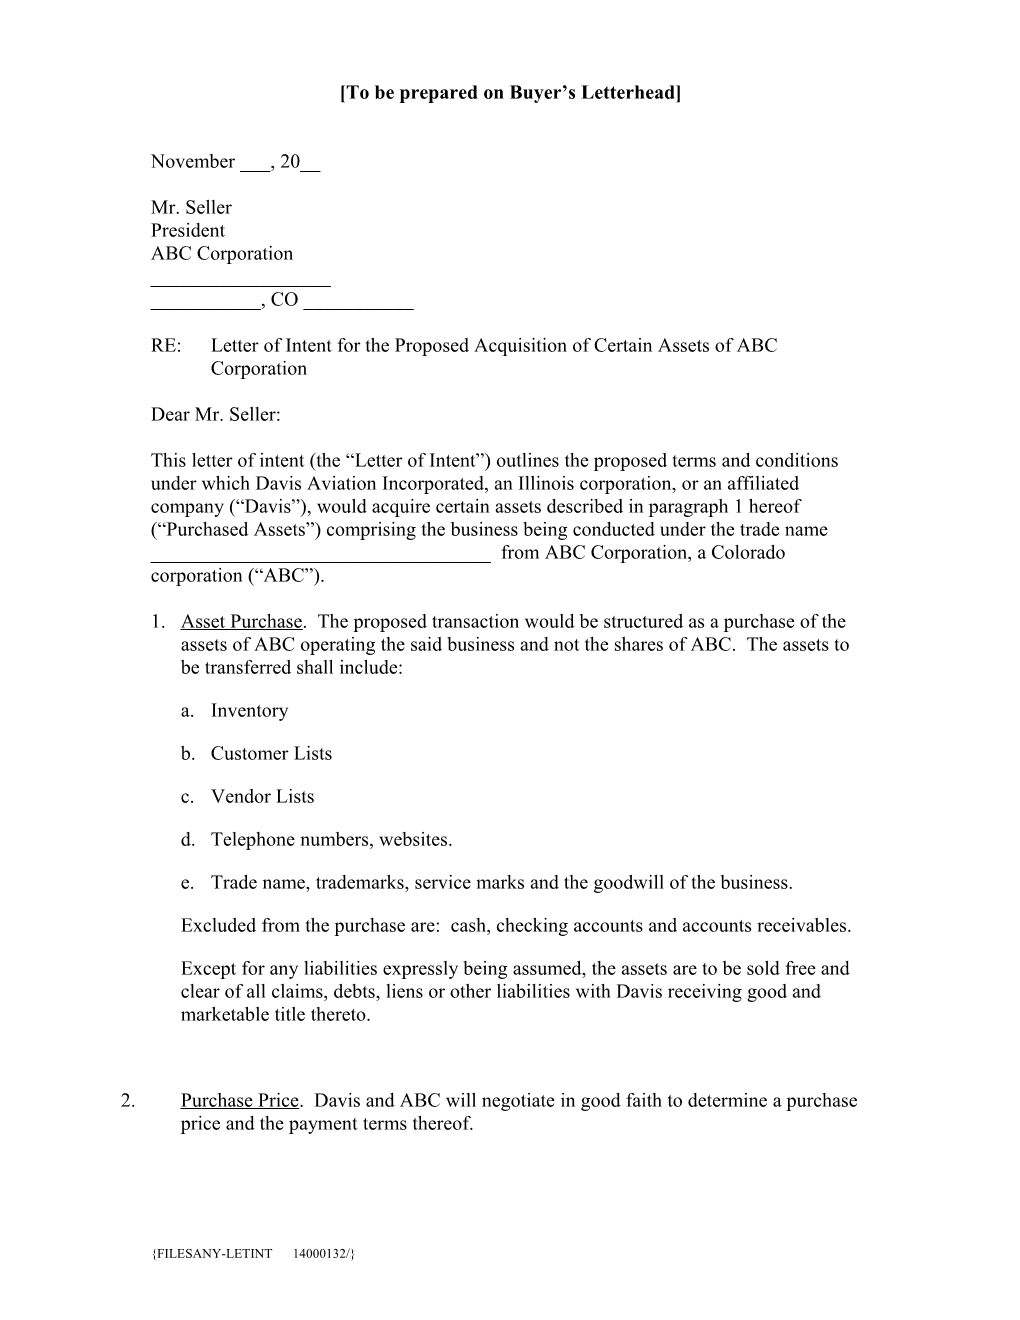 Letter of Intent Buyer (14000132)